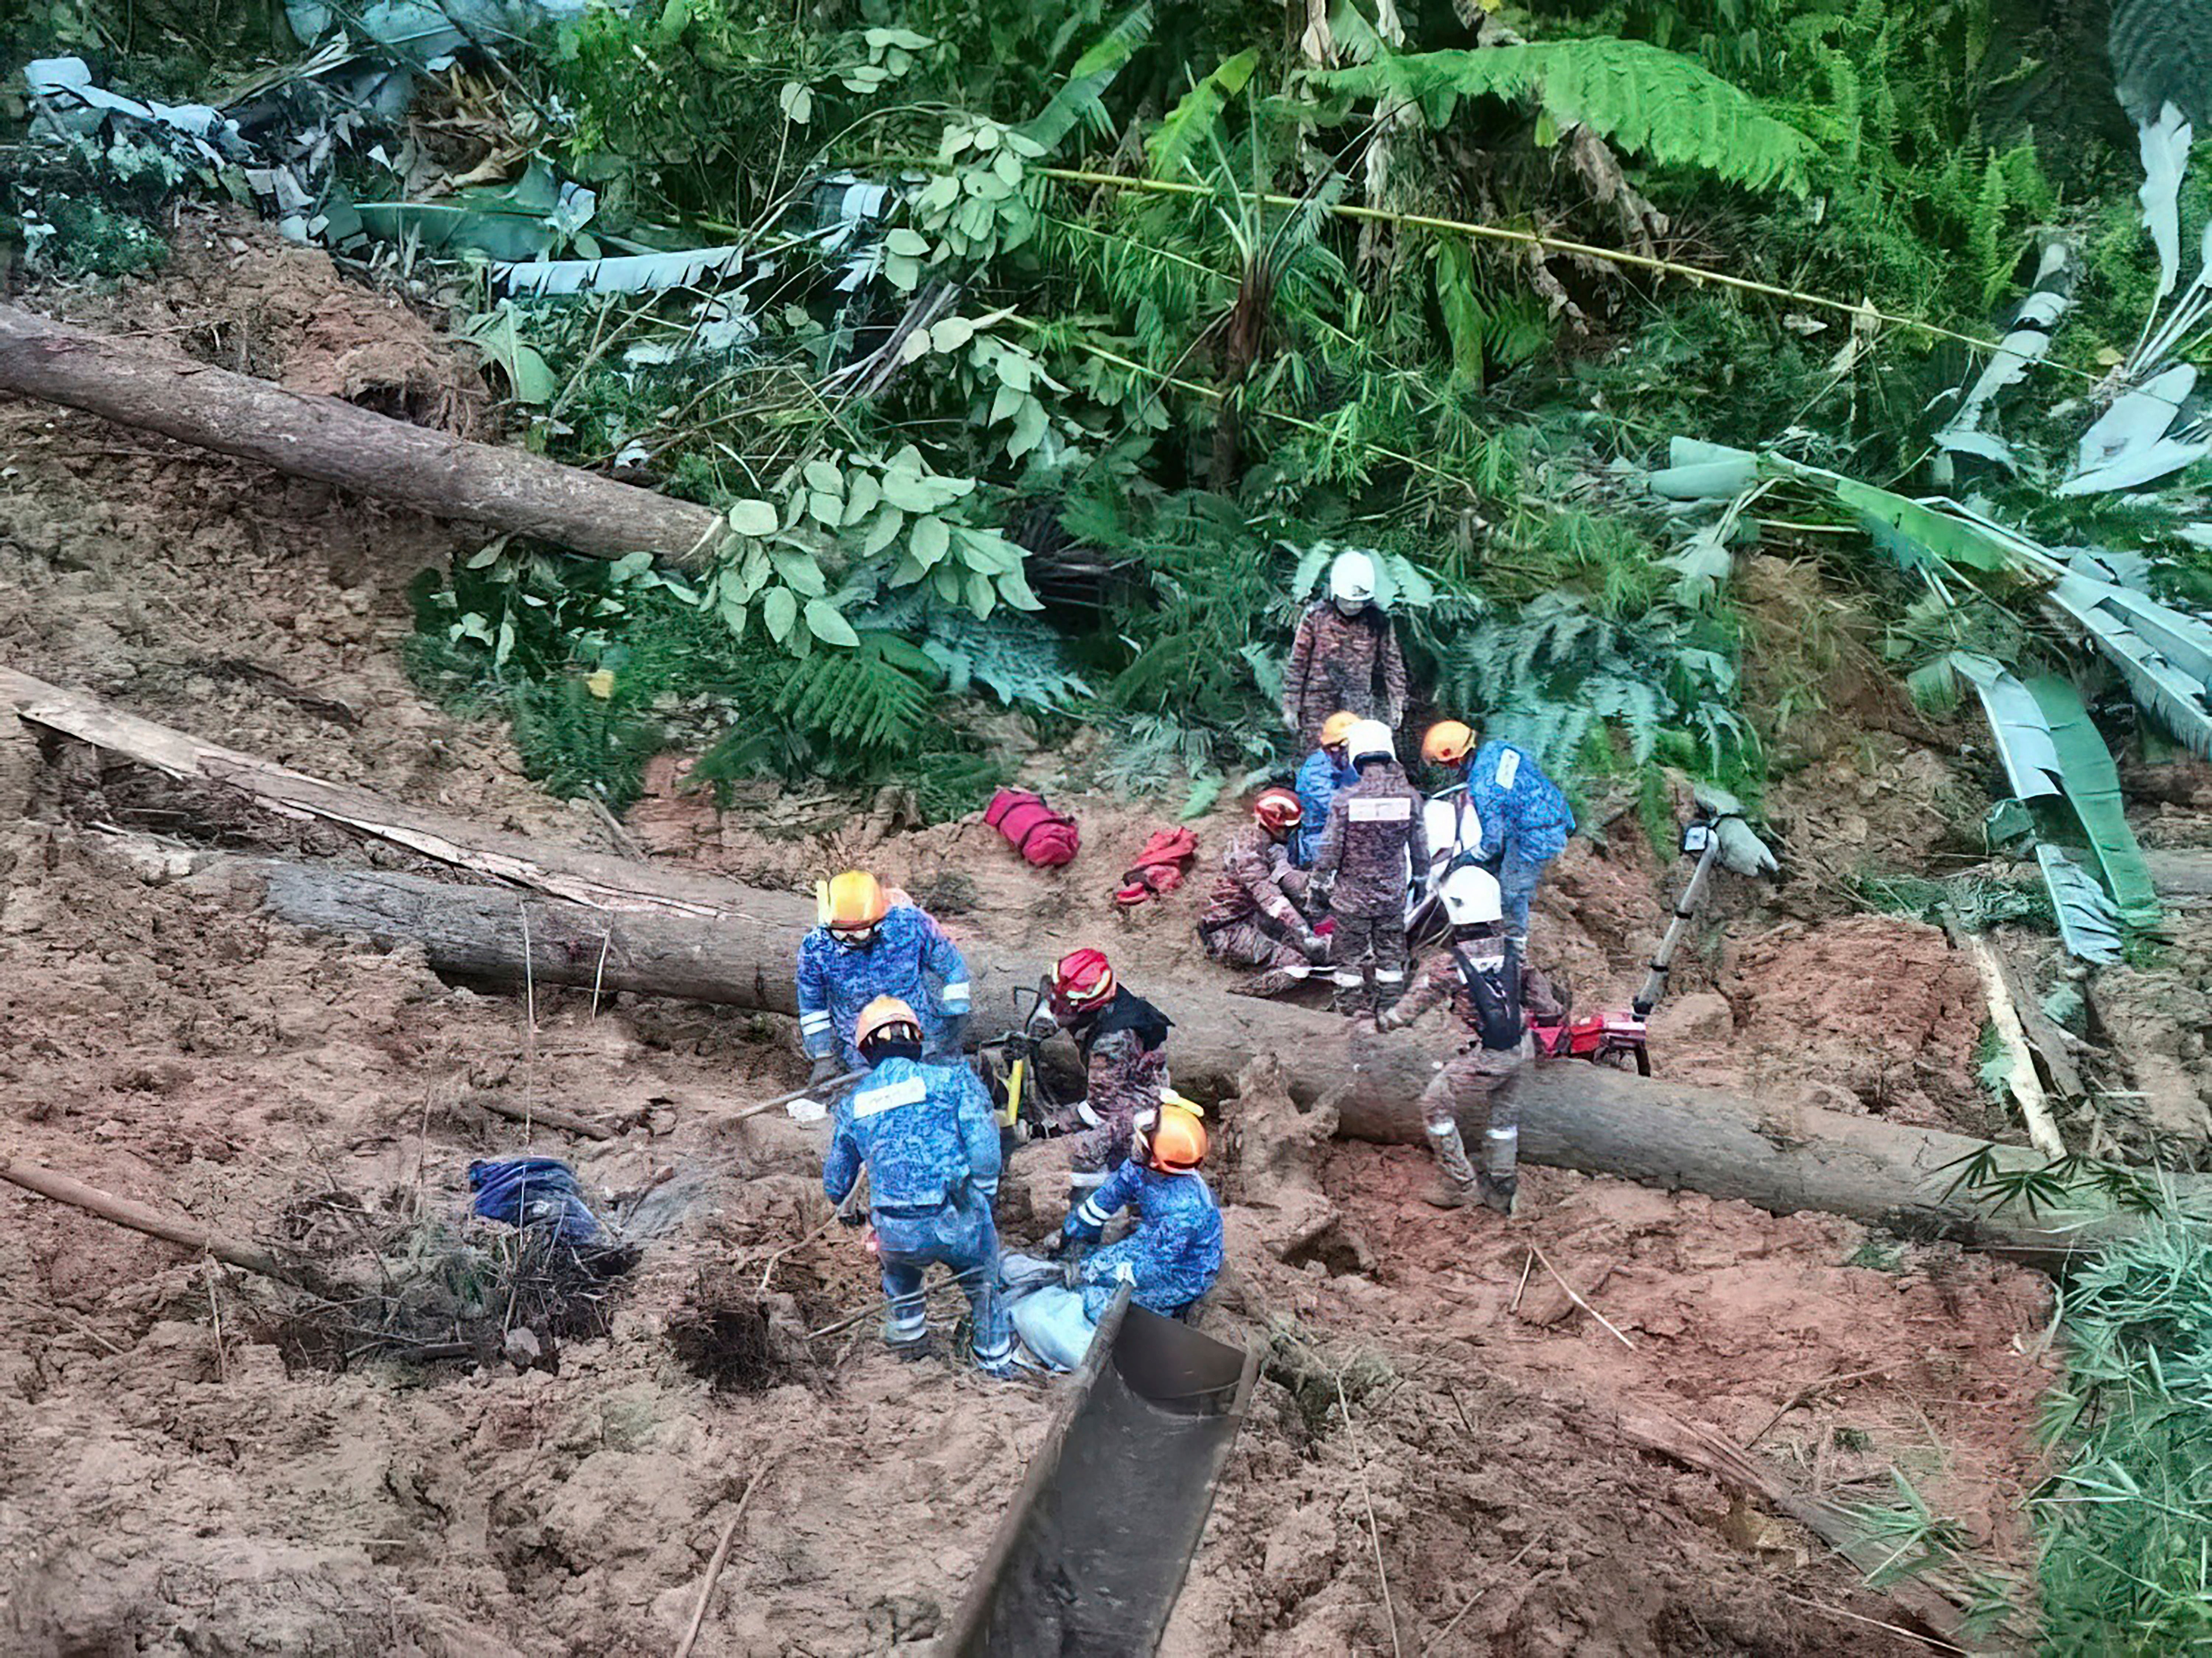 Civil Defense personnel search for missing persons after a landslide hit a campsite in Batang Kali, Malaysia